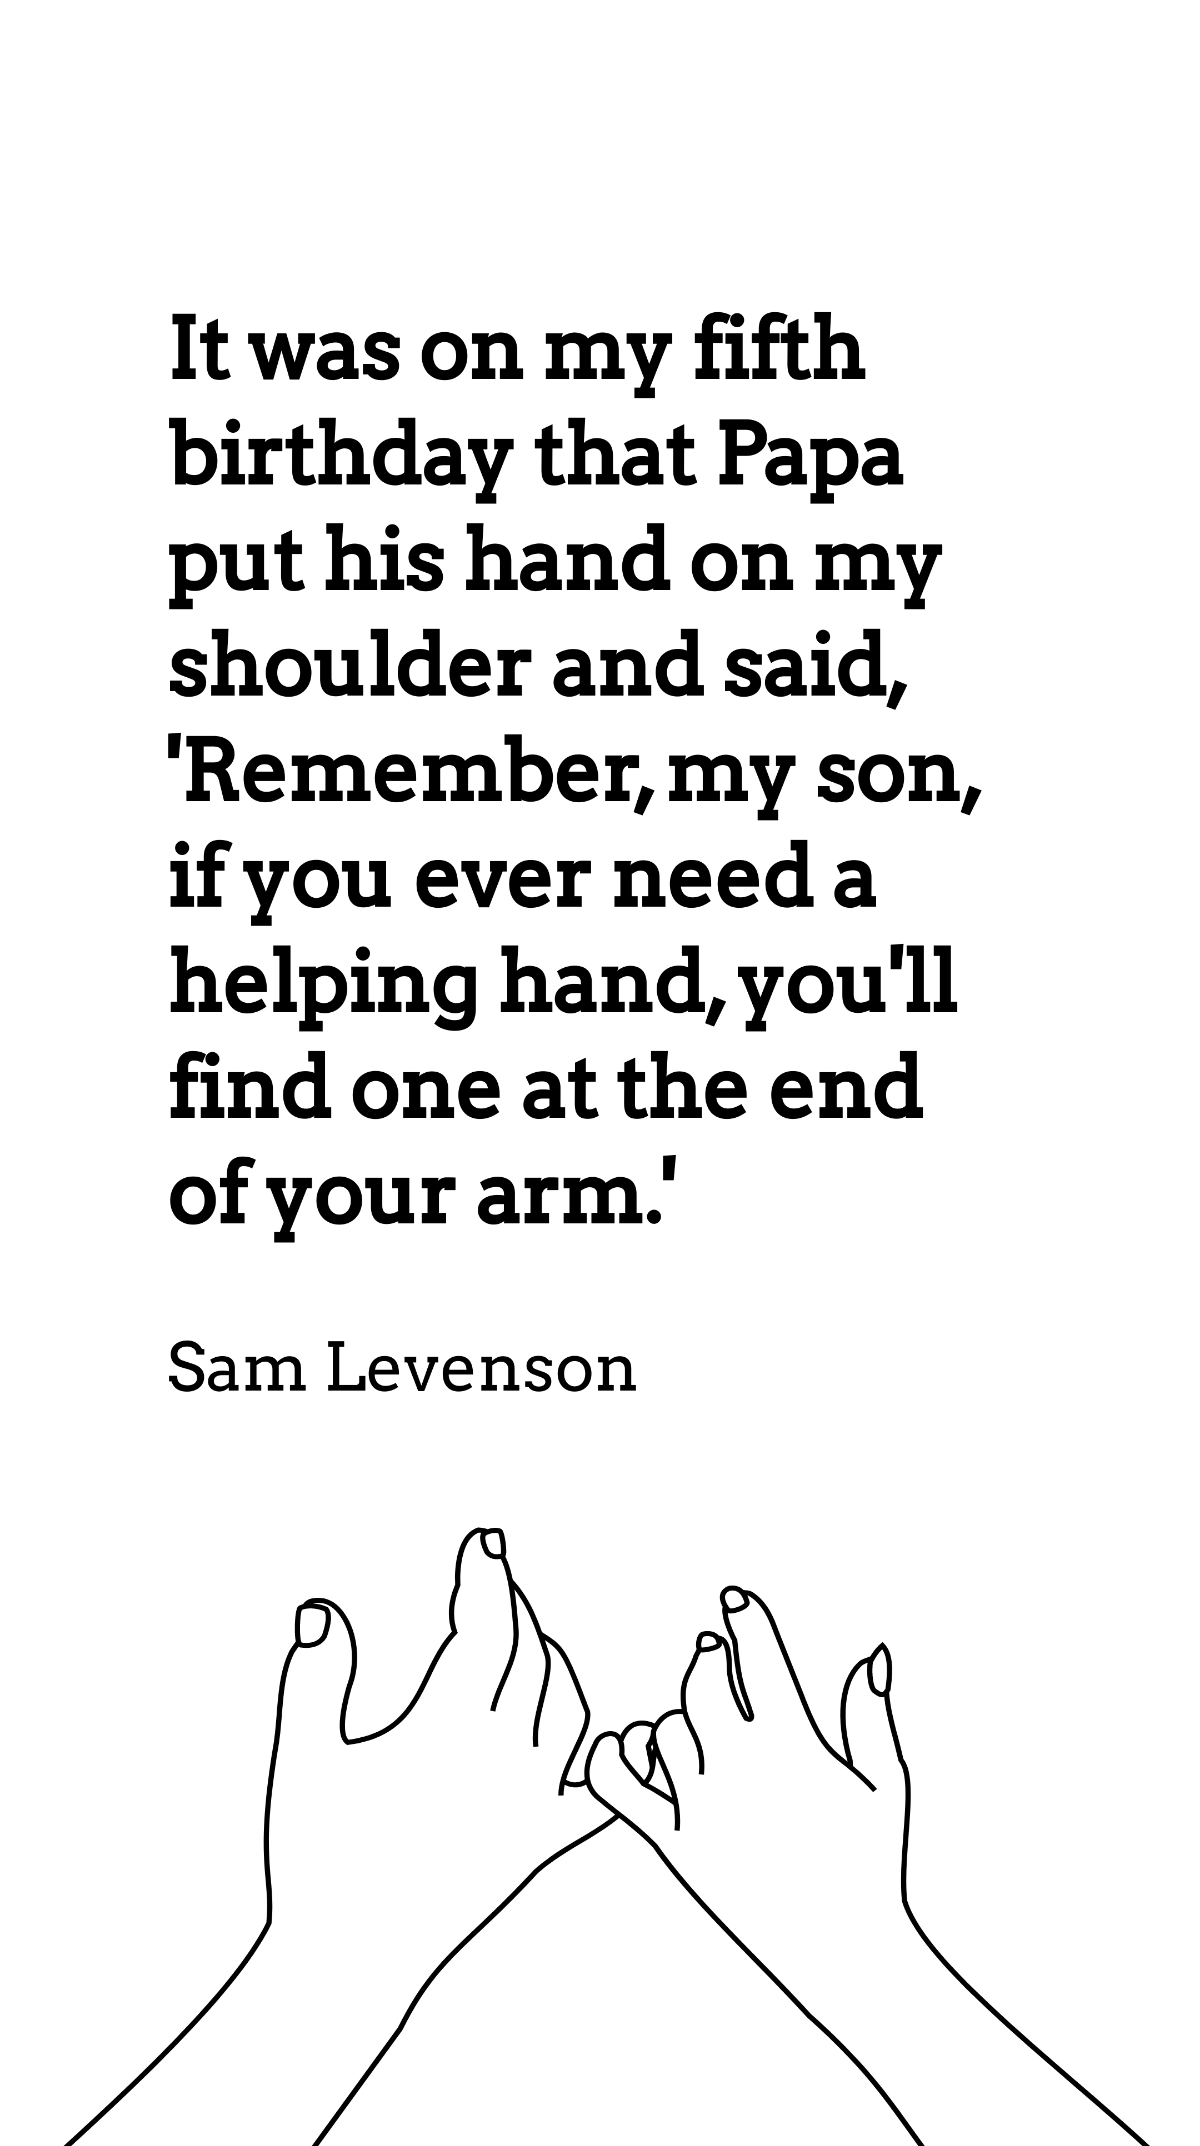 Sam Levenson - It was on my fifth birthday that Papa put his hand on my shoulder and said, 'Remember, my son, if you ever need a helping hand, you'll find one at the end of your arm.'